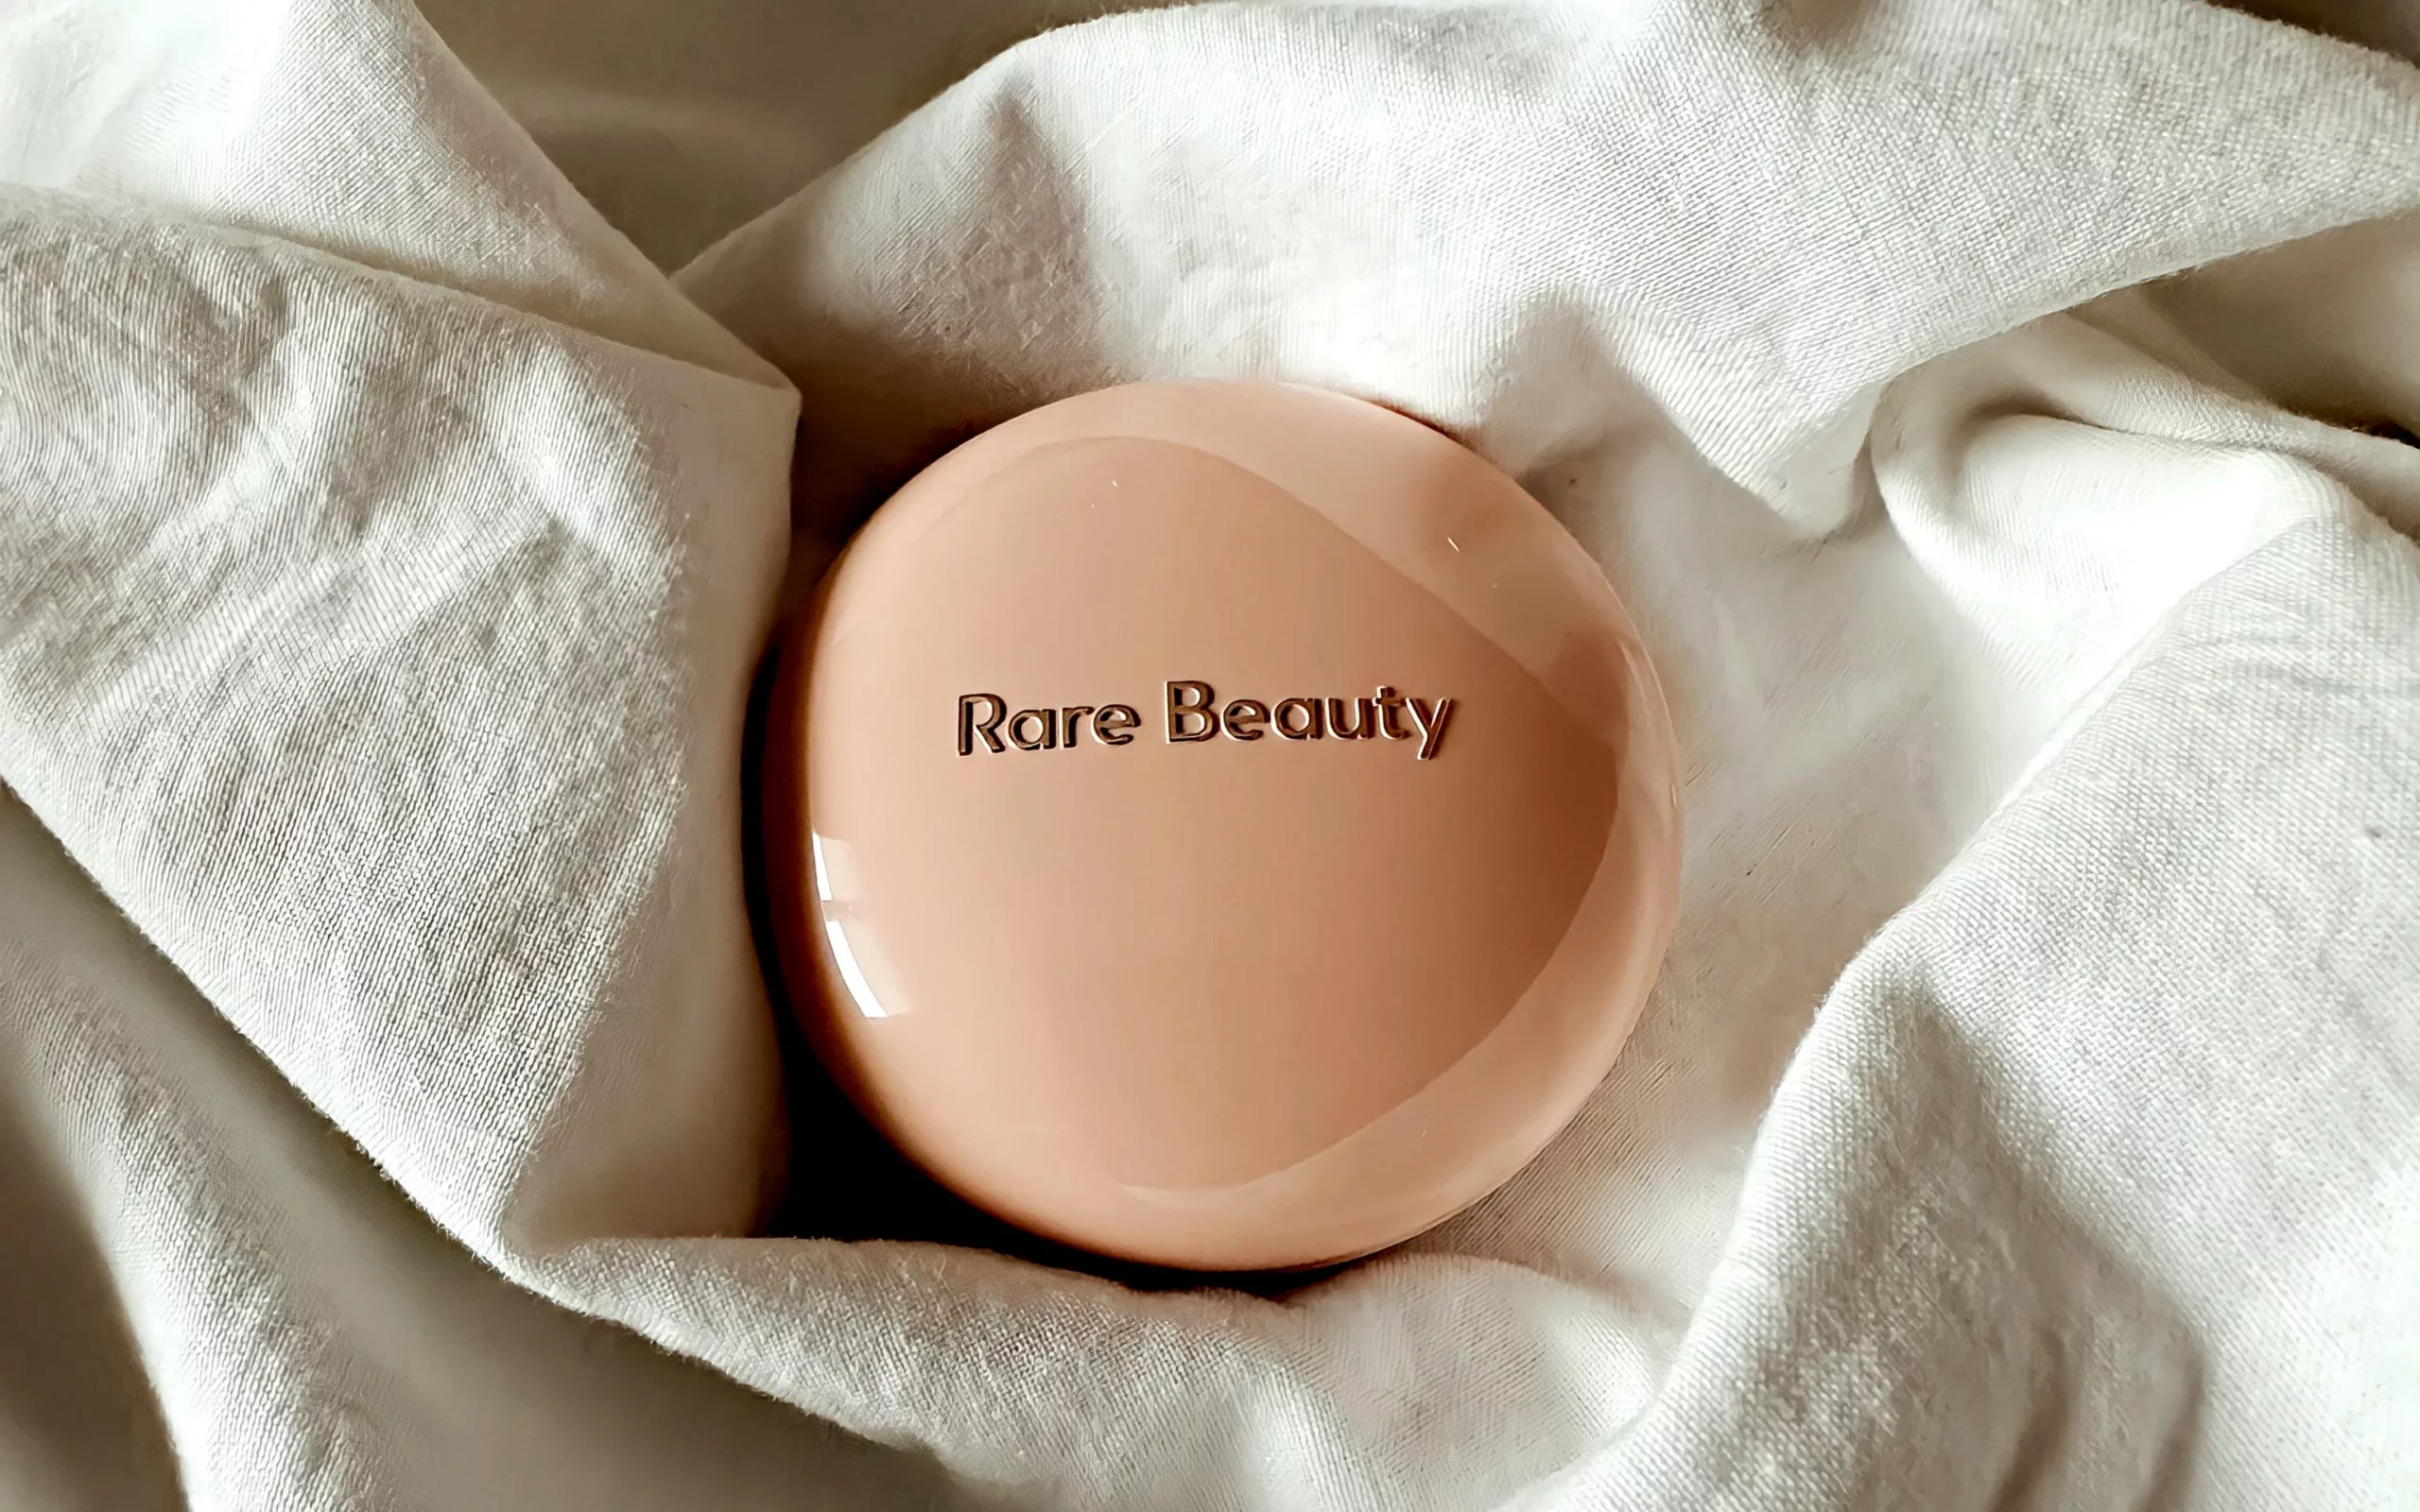 Rare Beauty’s International Selling Policies